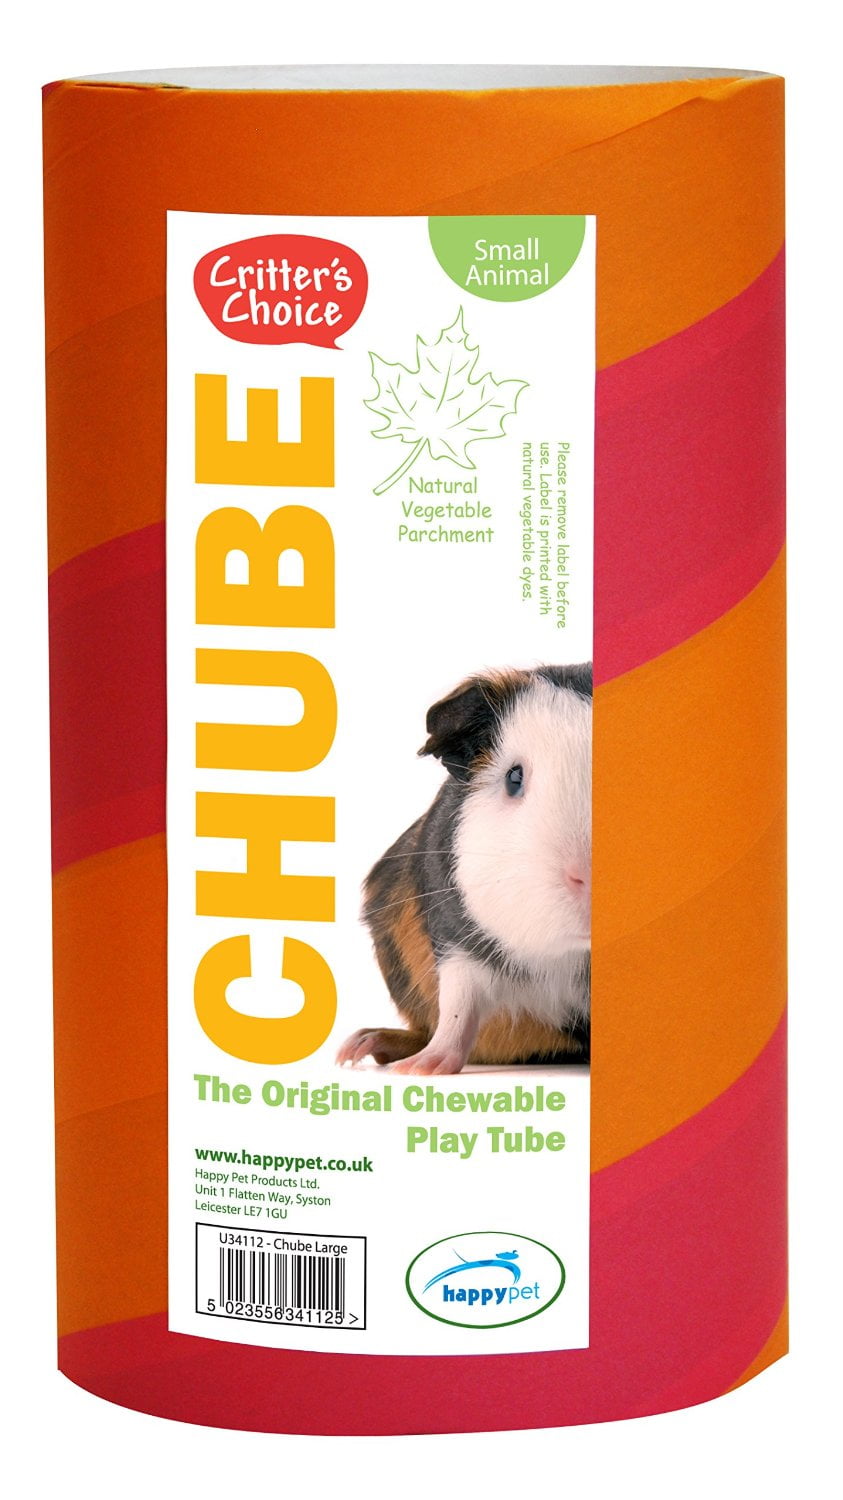 Chewable Play Tube for Small Animals